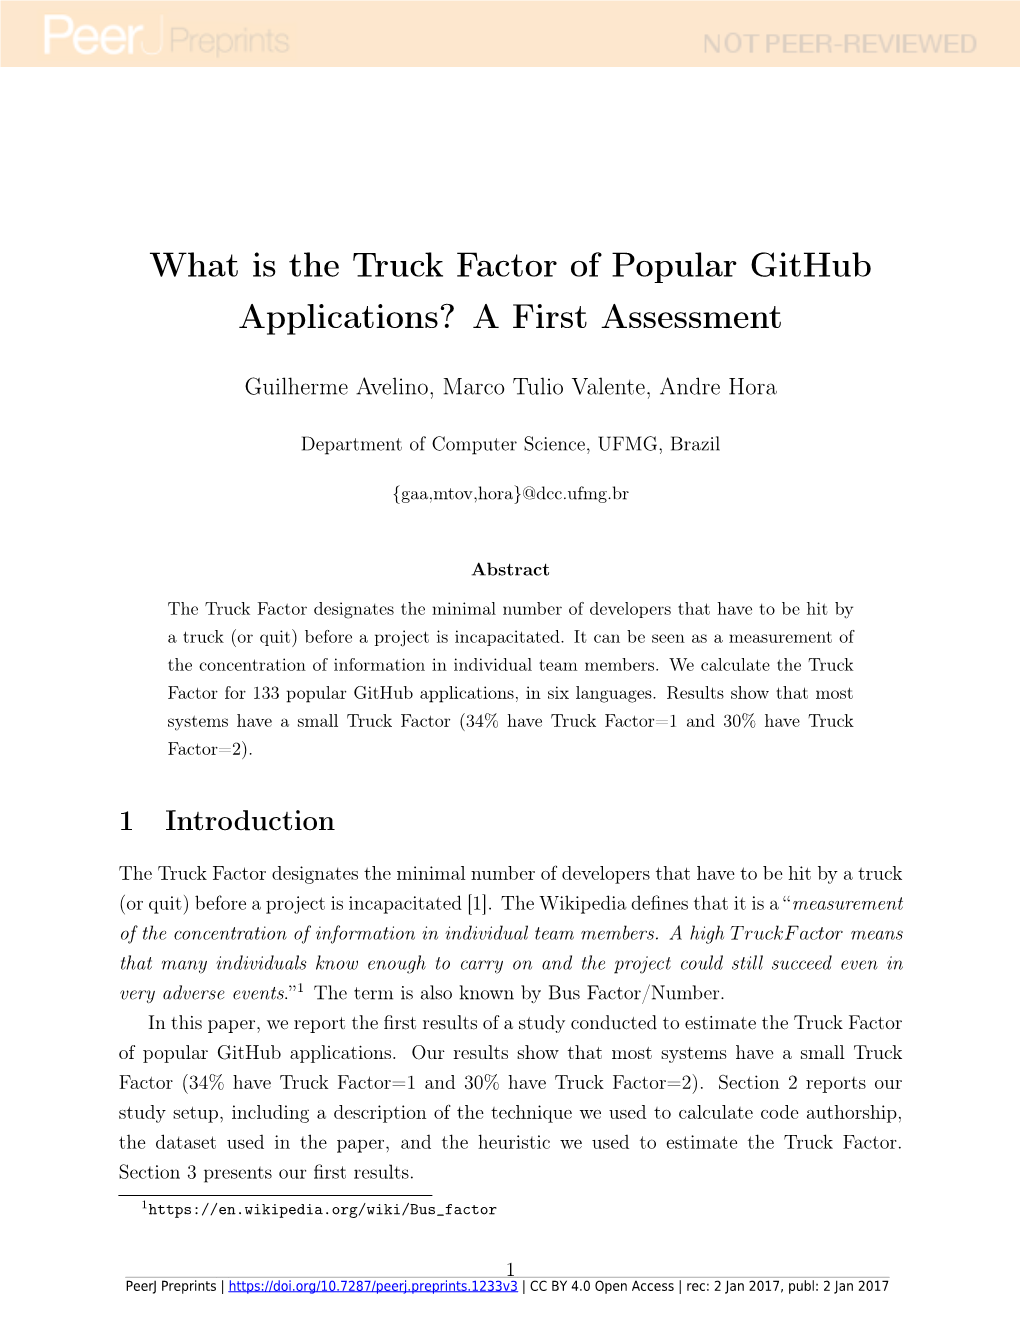 What Is the Truck Factor of Popular Github Applications? a First Assessment